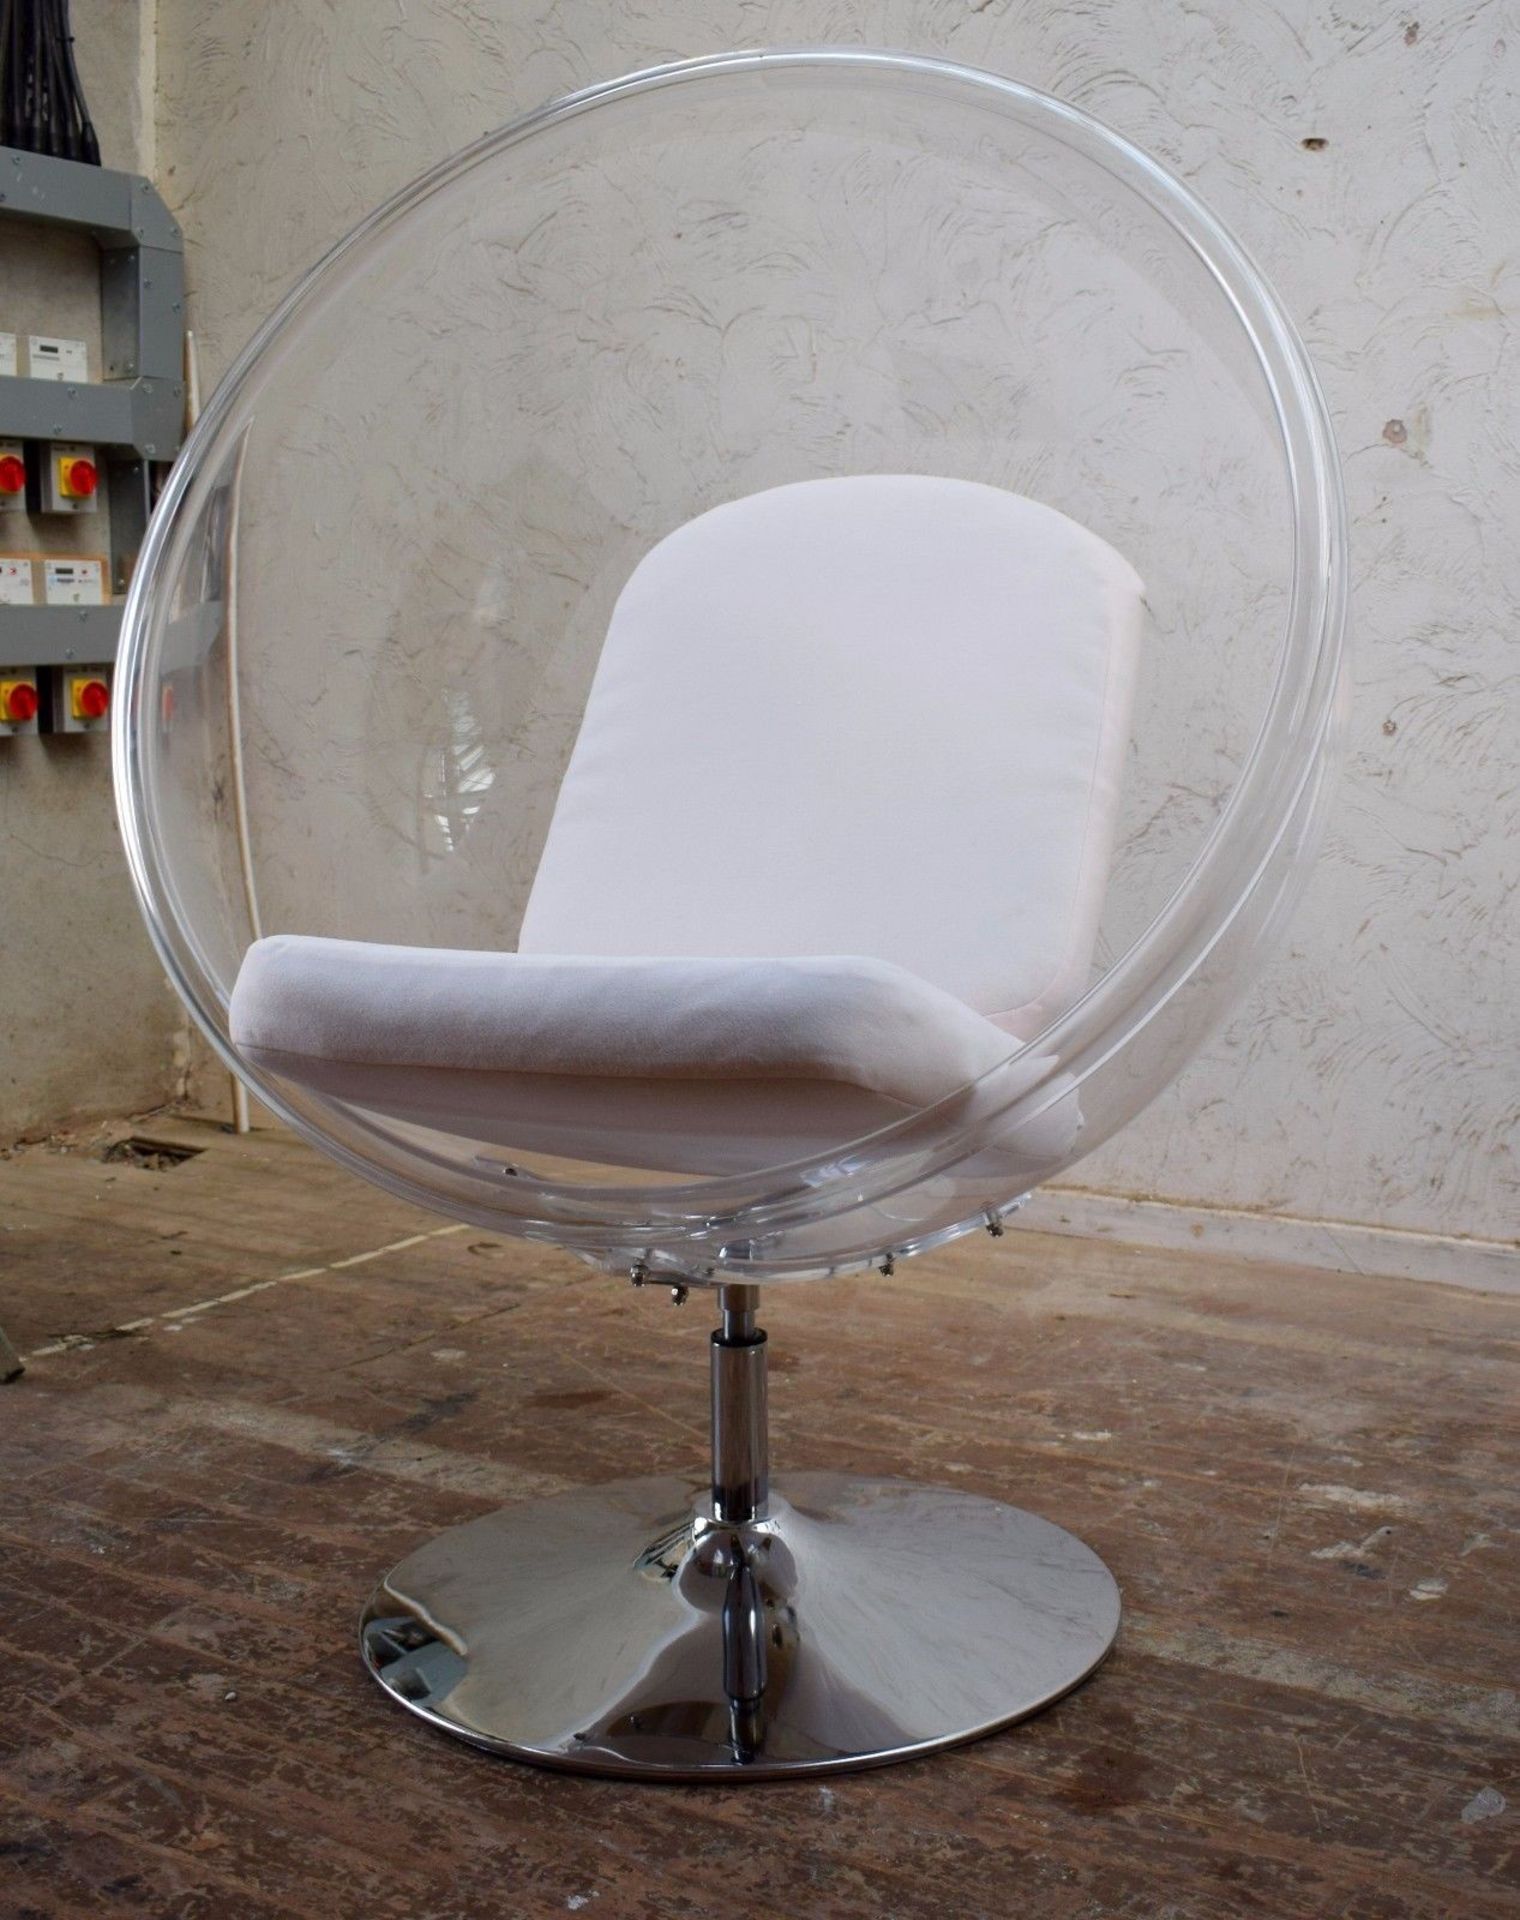 NO VAT /NEW BOXED EERO AARNIO STYLE BUBBLE CHAIR ON BASE